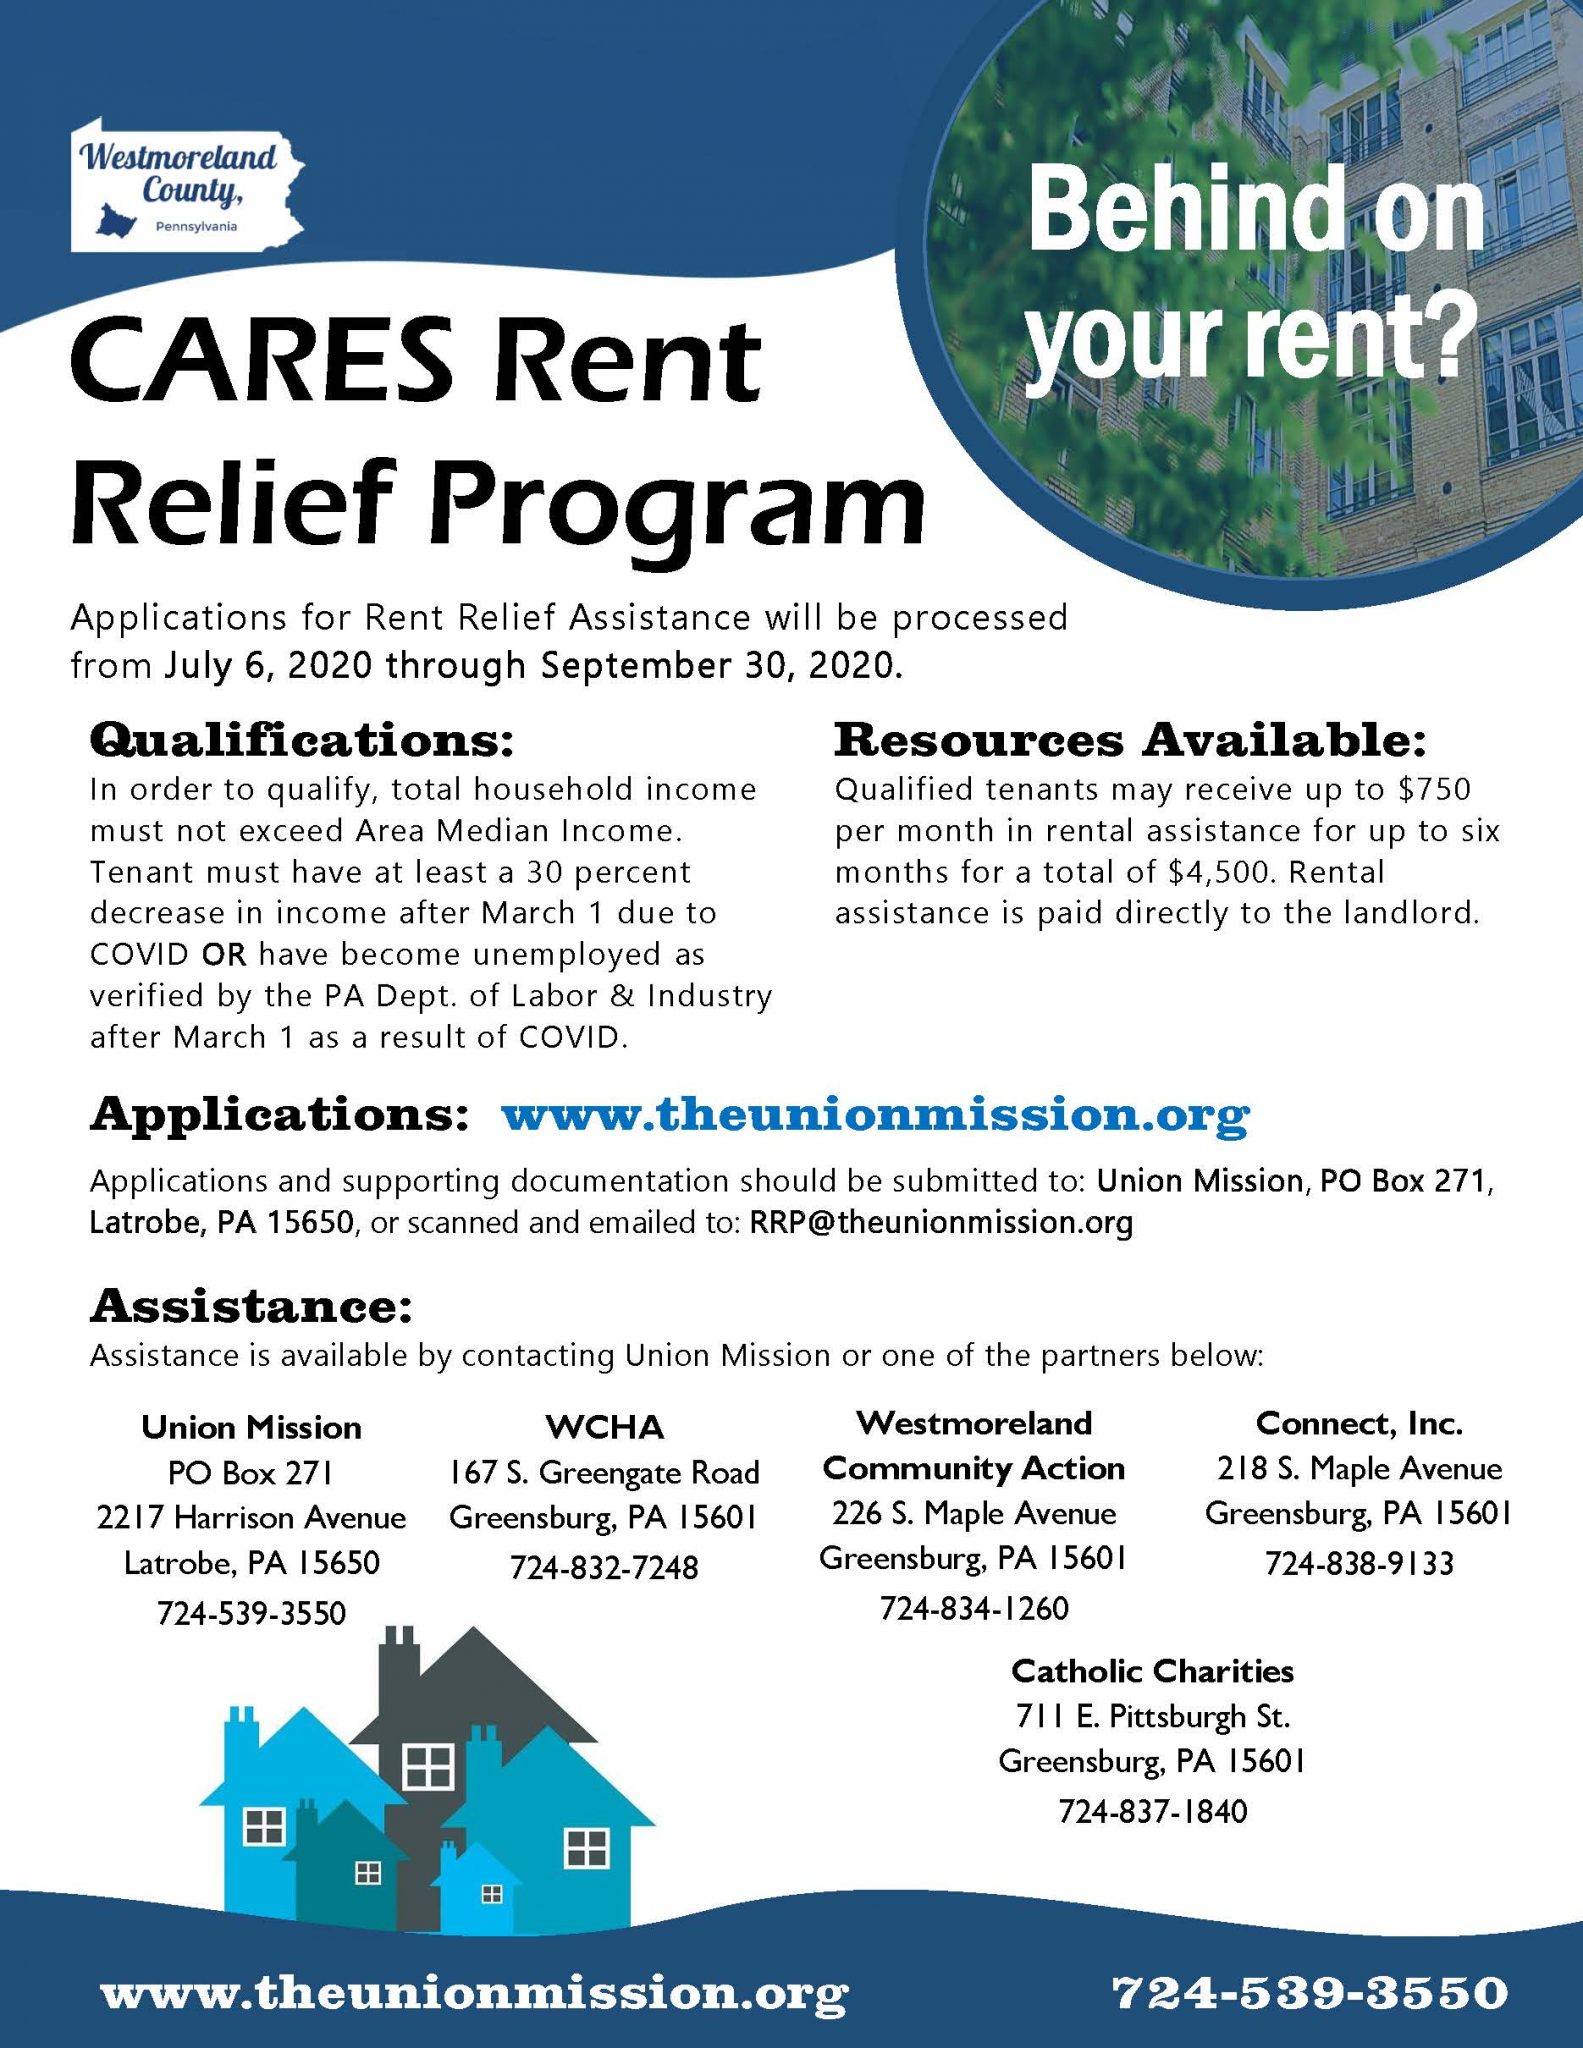 Behind on your rent? Cares Rent Relief Program may be able to help